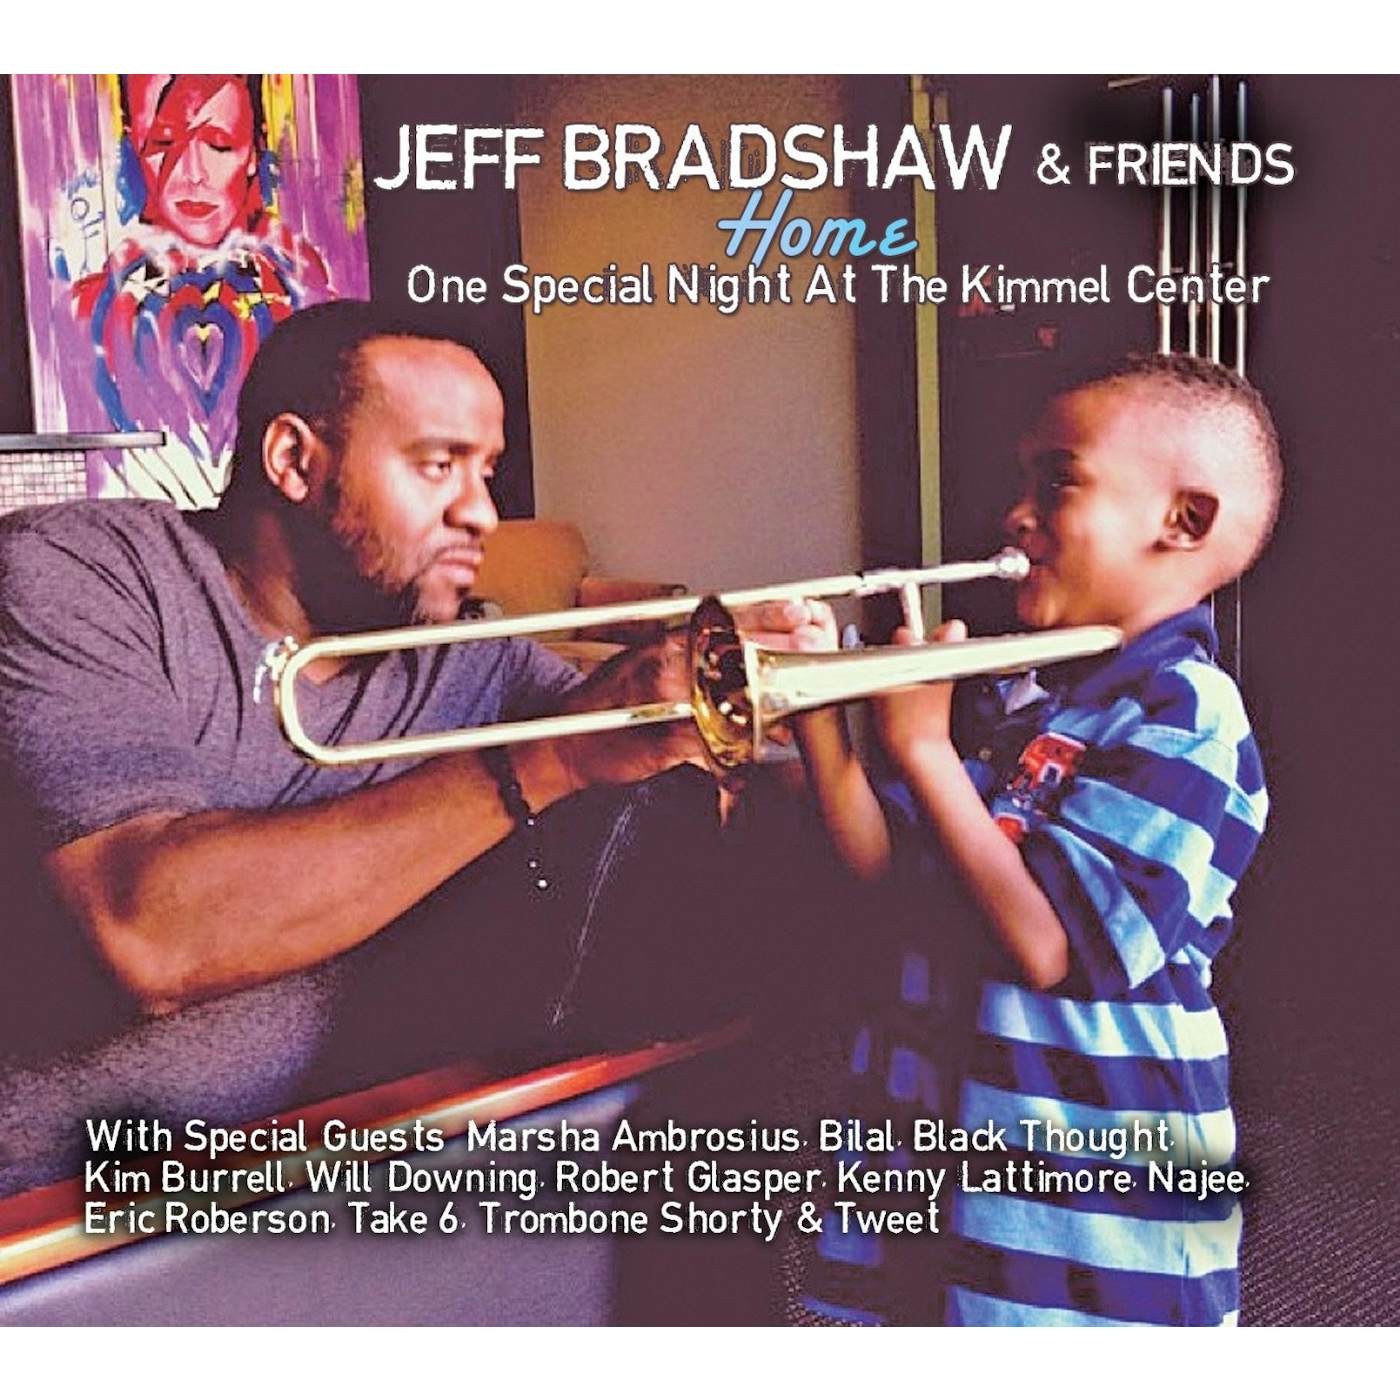 Jeff Bradshaw ONE SPECIAL NIGHT AT THE KIMMEL CENTER CD